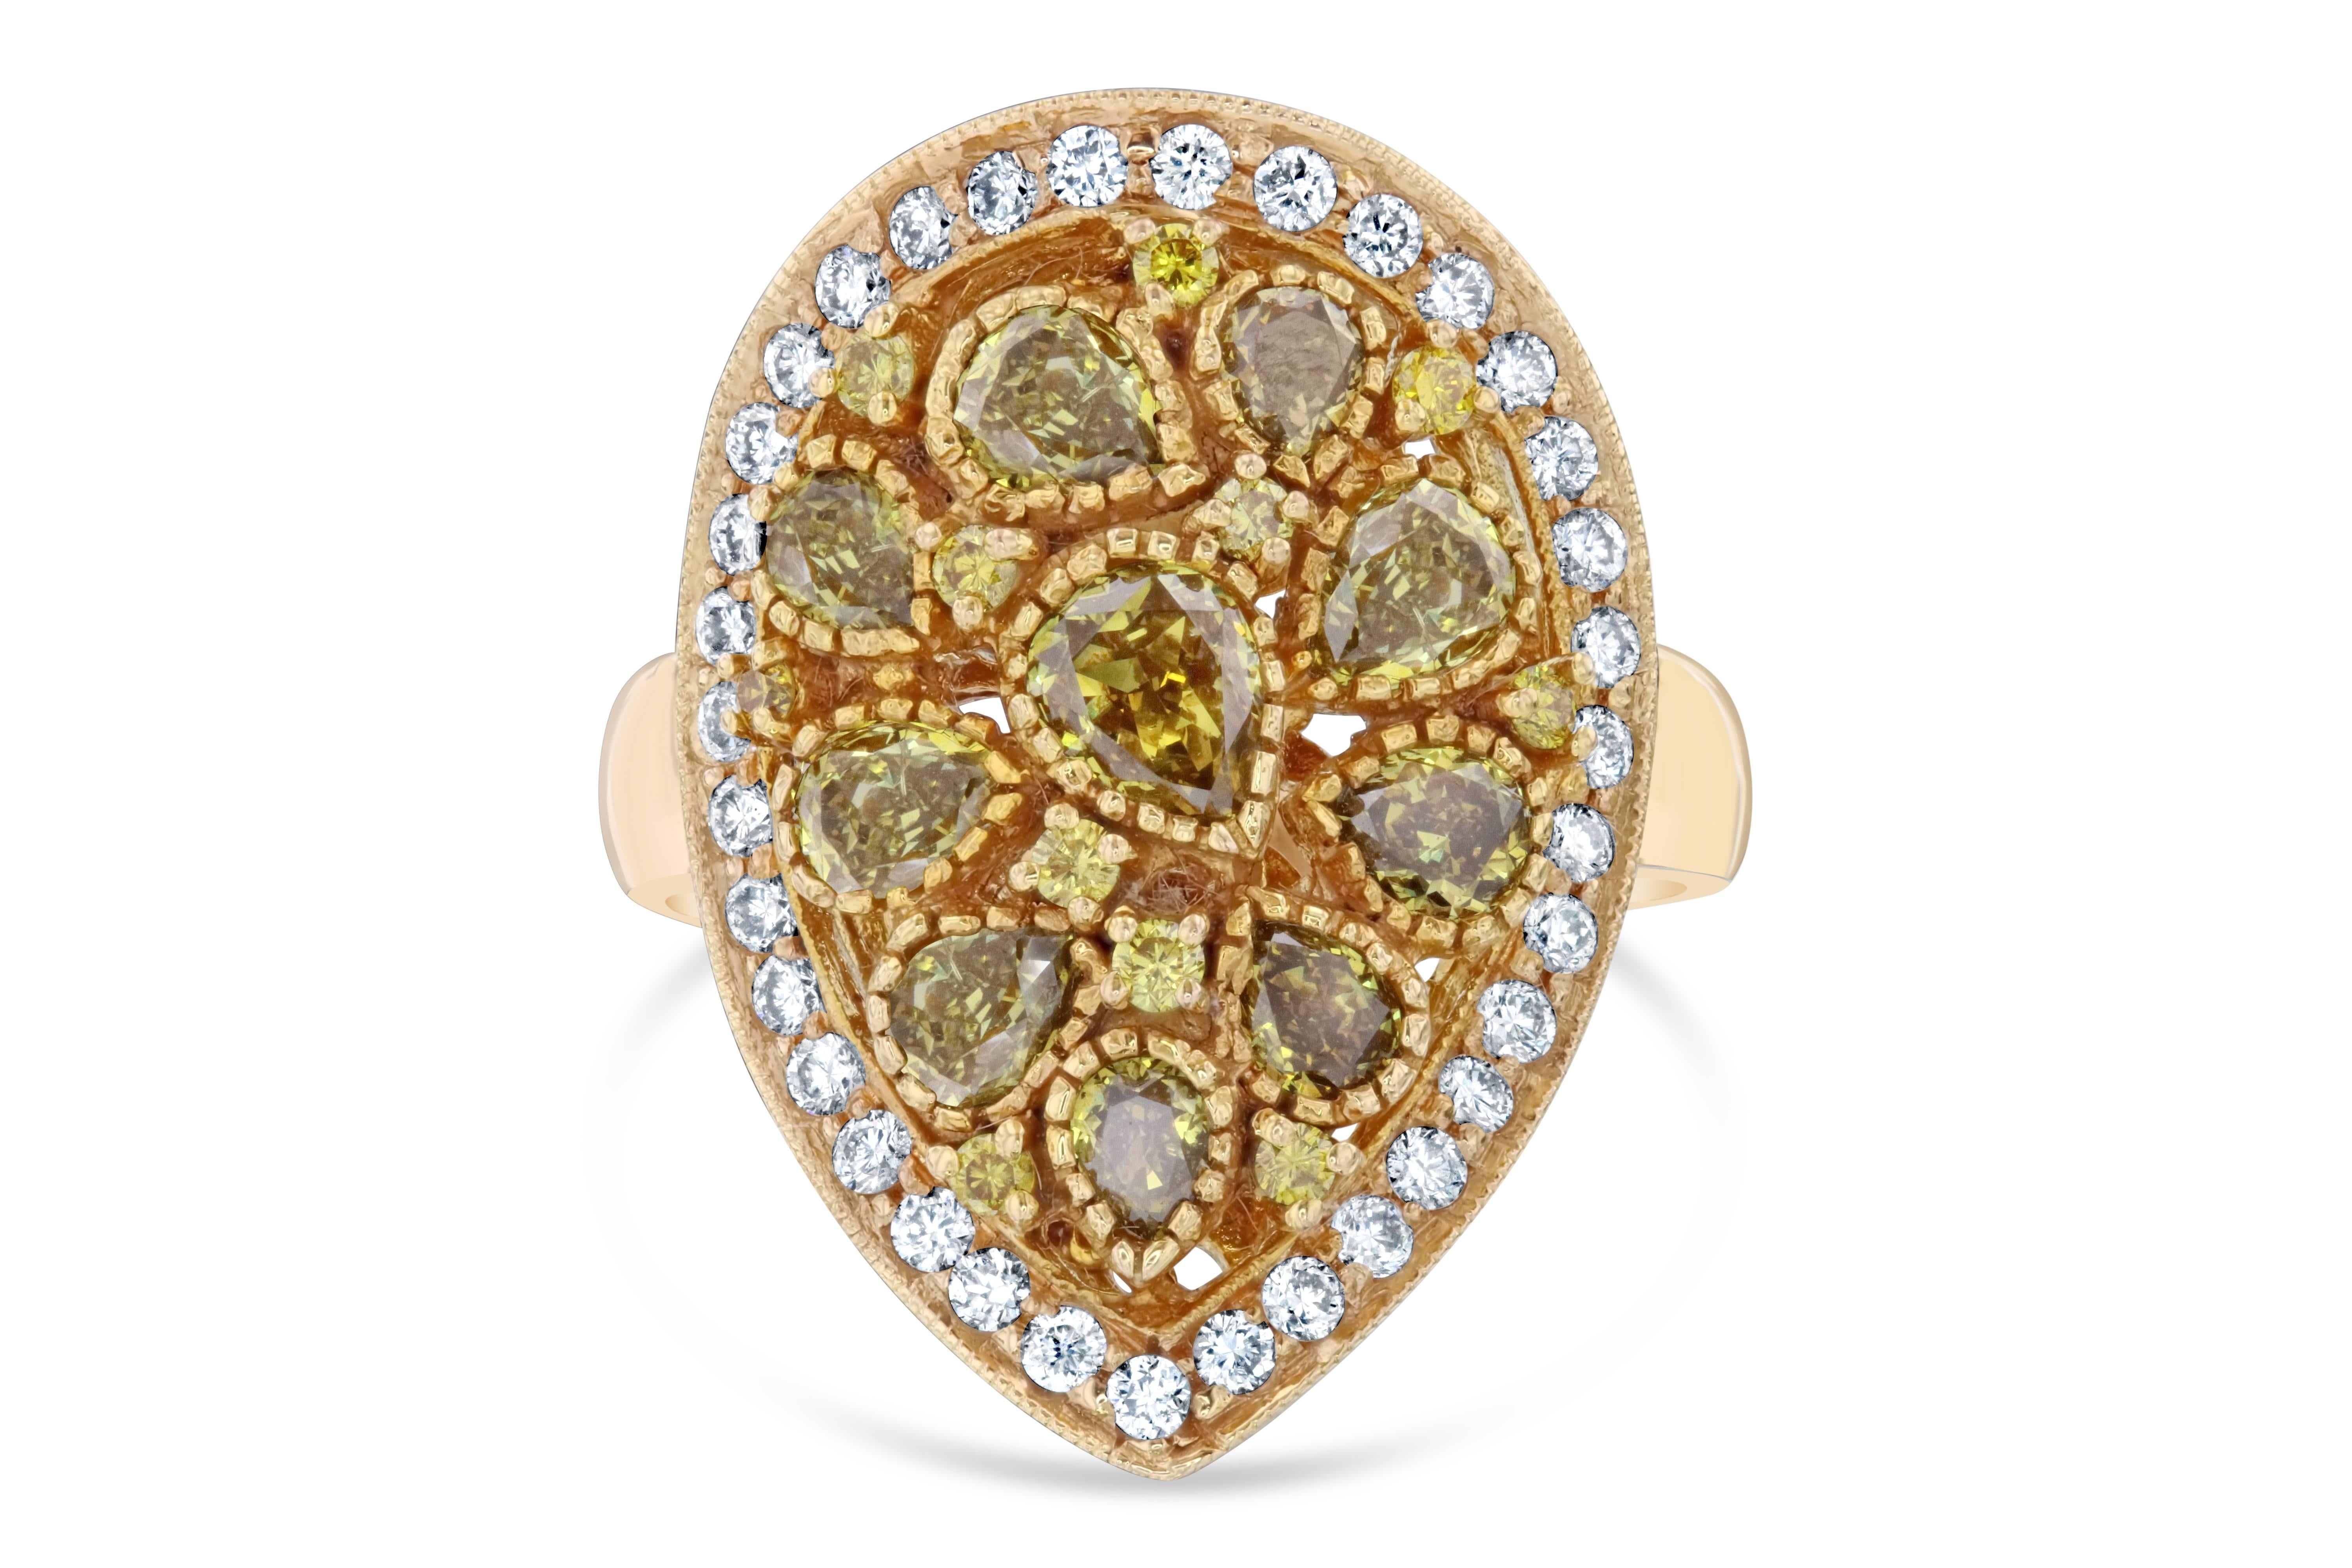 Another gorgeous version of our bubble gum cocktail ring in a Pear Cut setting!  There are 10 Pear Cut Fancy Colored Diamonds that weigh 1.91 carats floating around the center of the ring.  The colors and sizes of the diamonds vary from dark brown